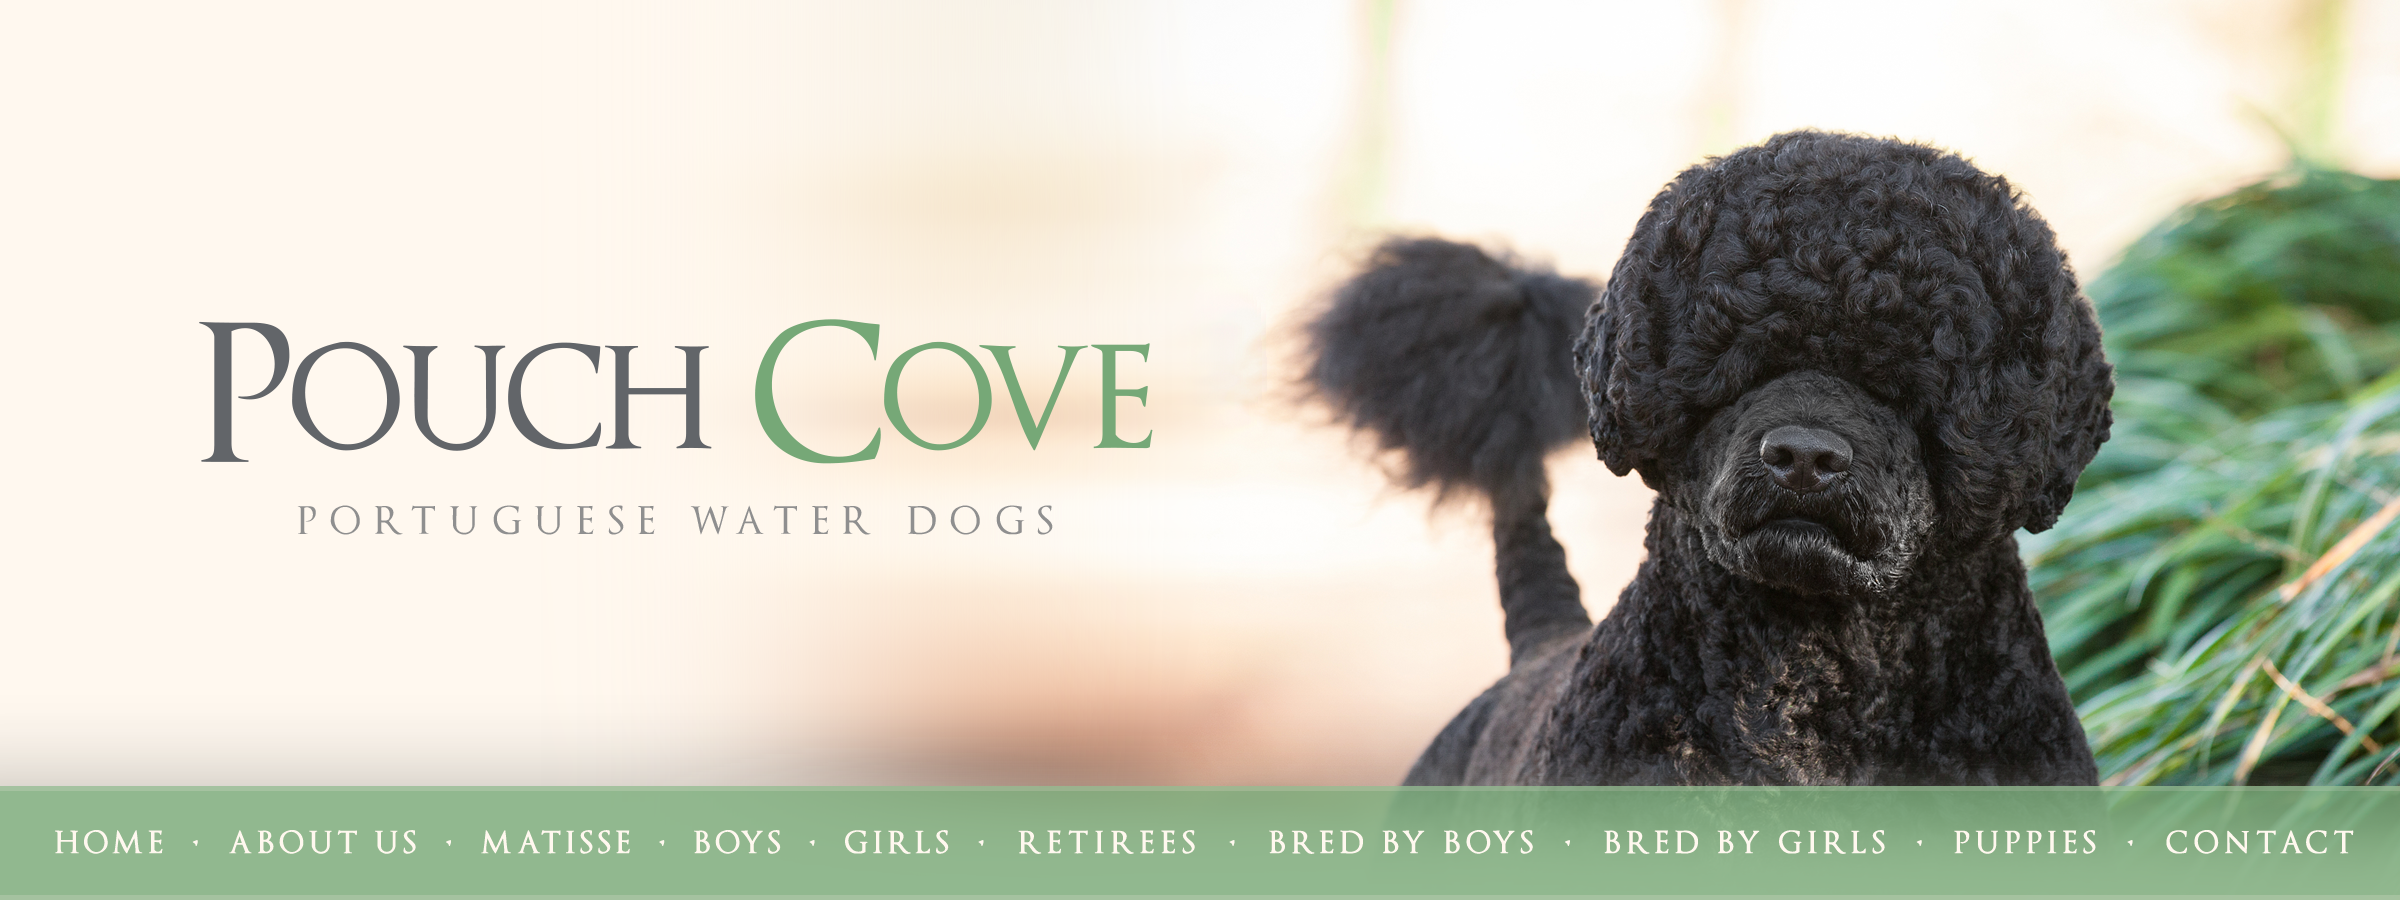 Pouch Cove Portuguese Water Dogs • Welcome2400 x 900